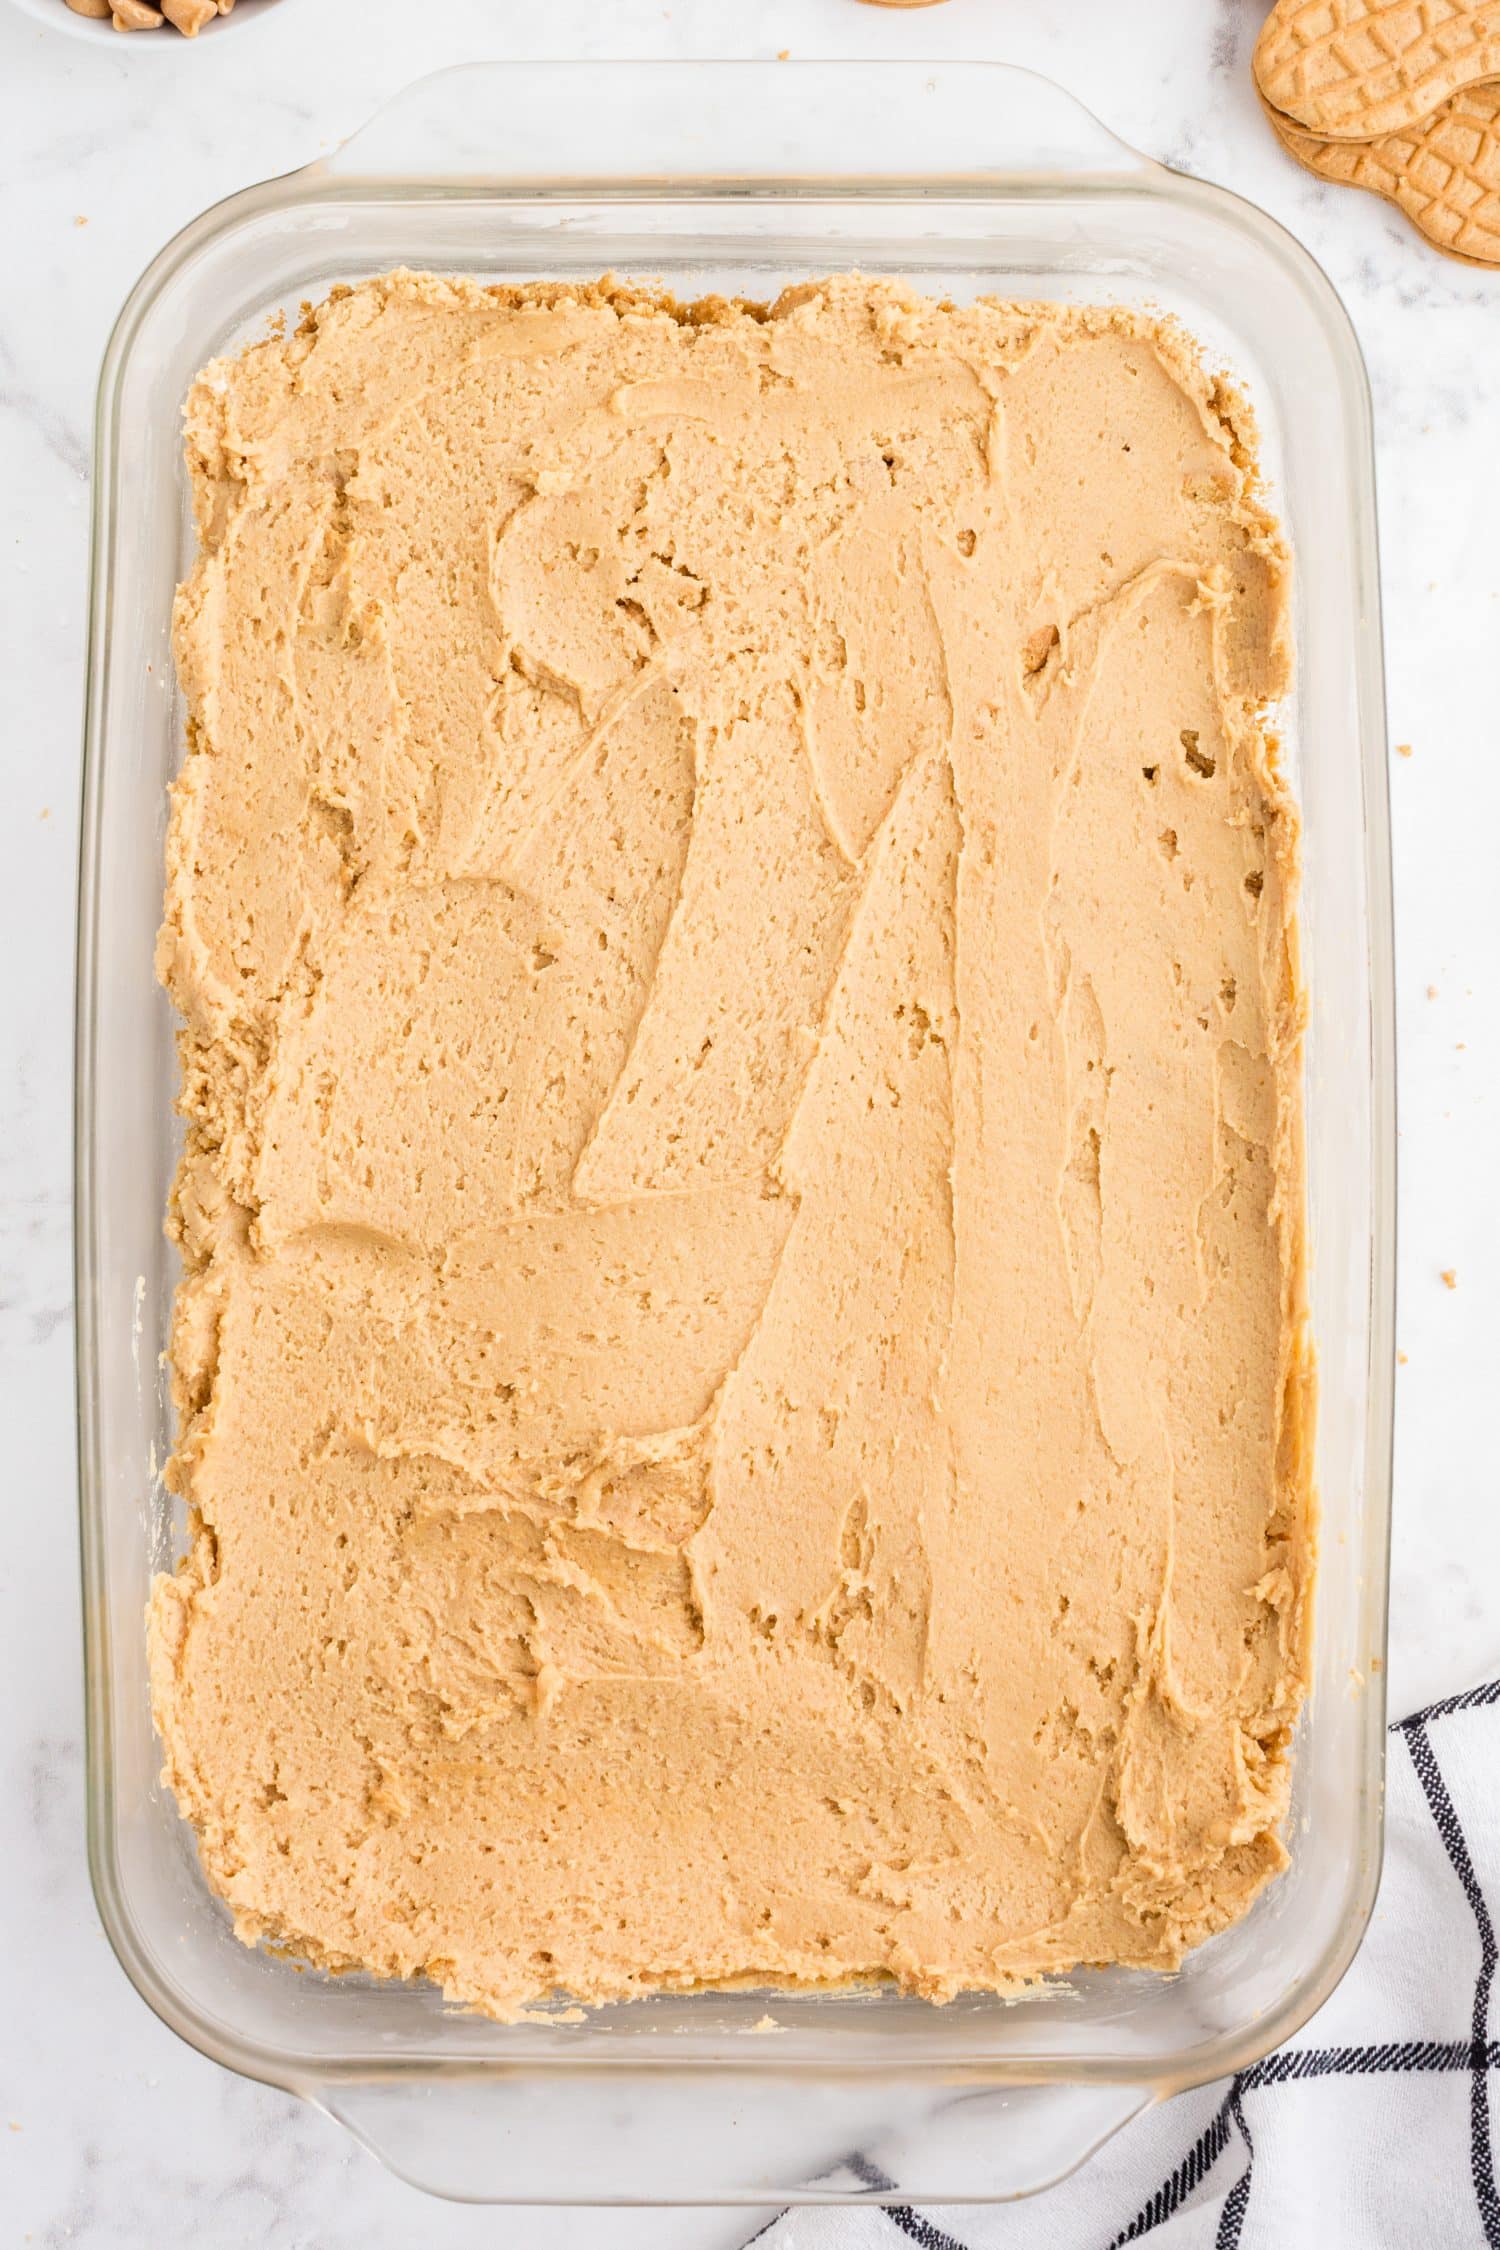 Baking dish with peanut butter cream cheese layer over the Nutter Butter dessert base.